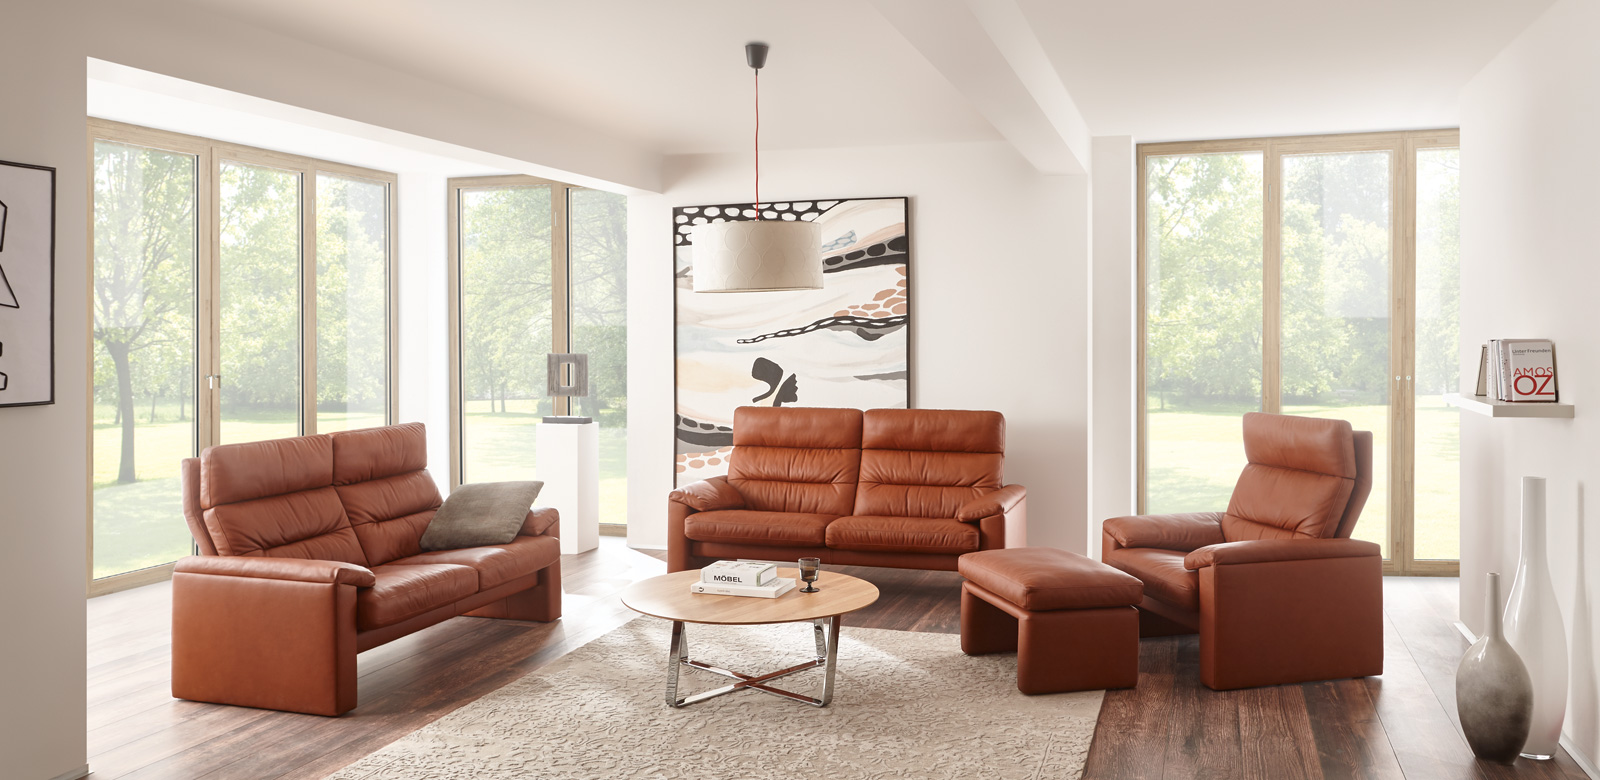 The modern design language of the high-quality Lincoln design leather sofa is reflected in the glove-soft leather, complemented by the flexible adjustment to personal seating habits through functional seat and back cushions: a relax sofa that matches the style of any interior.